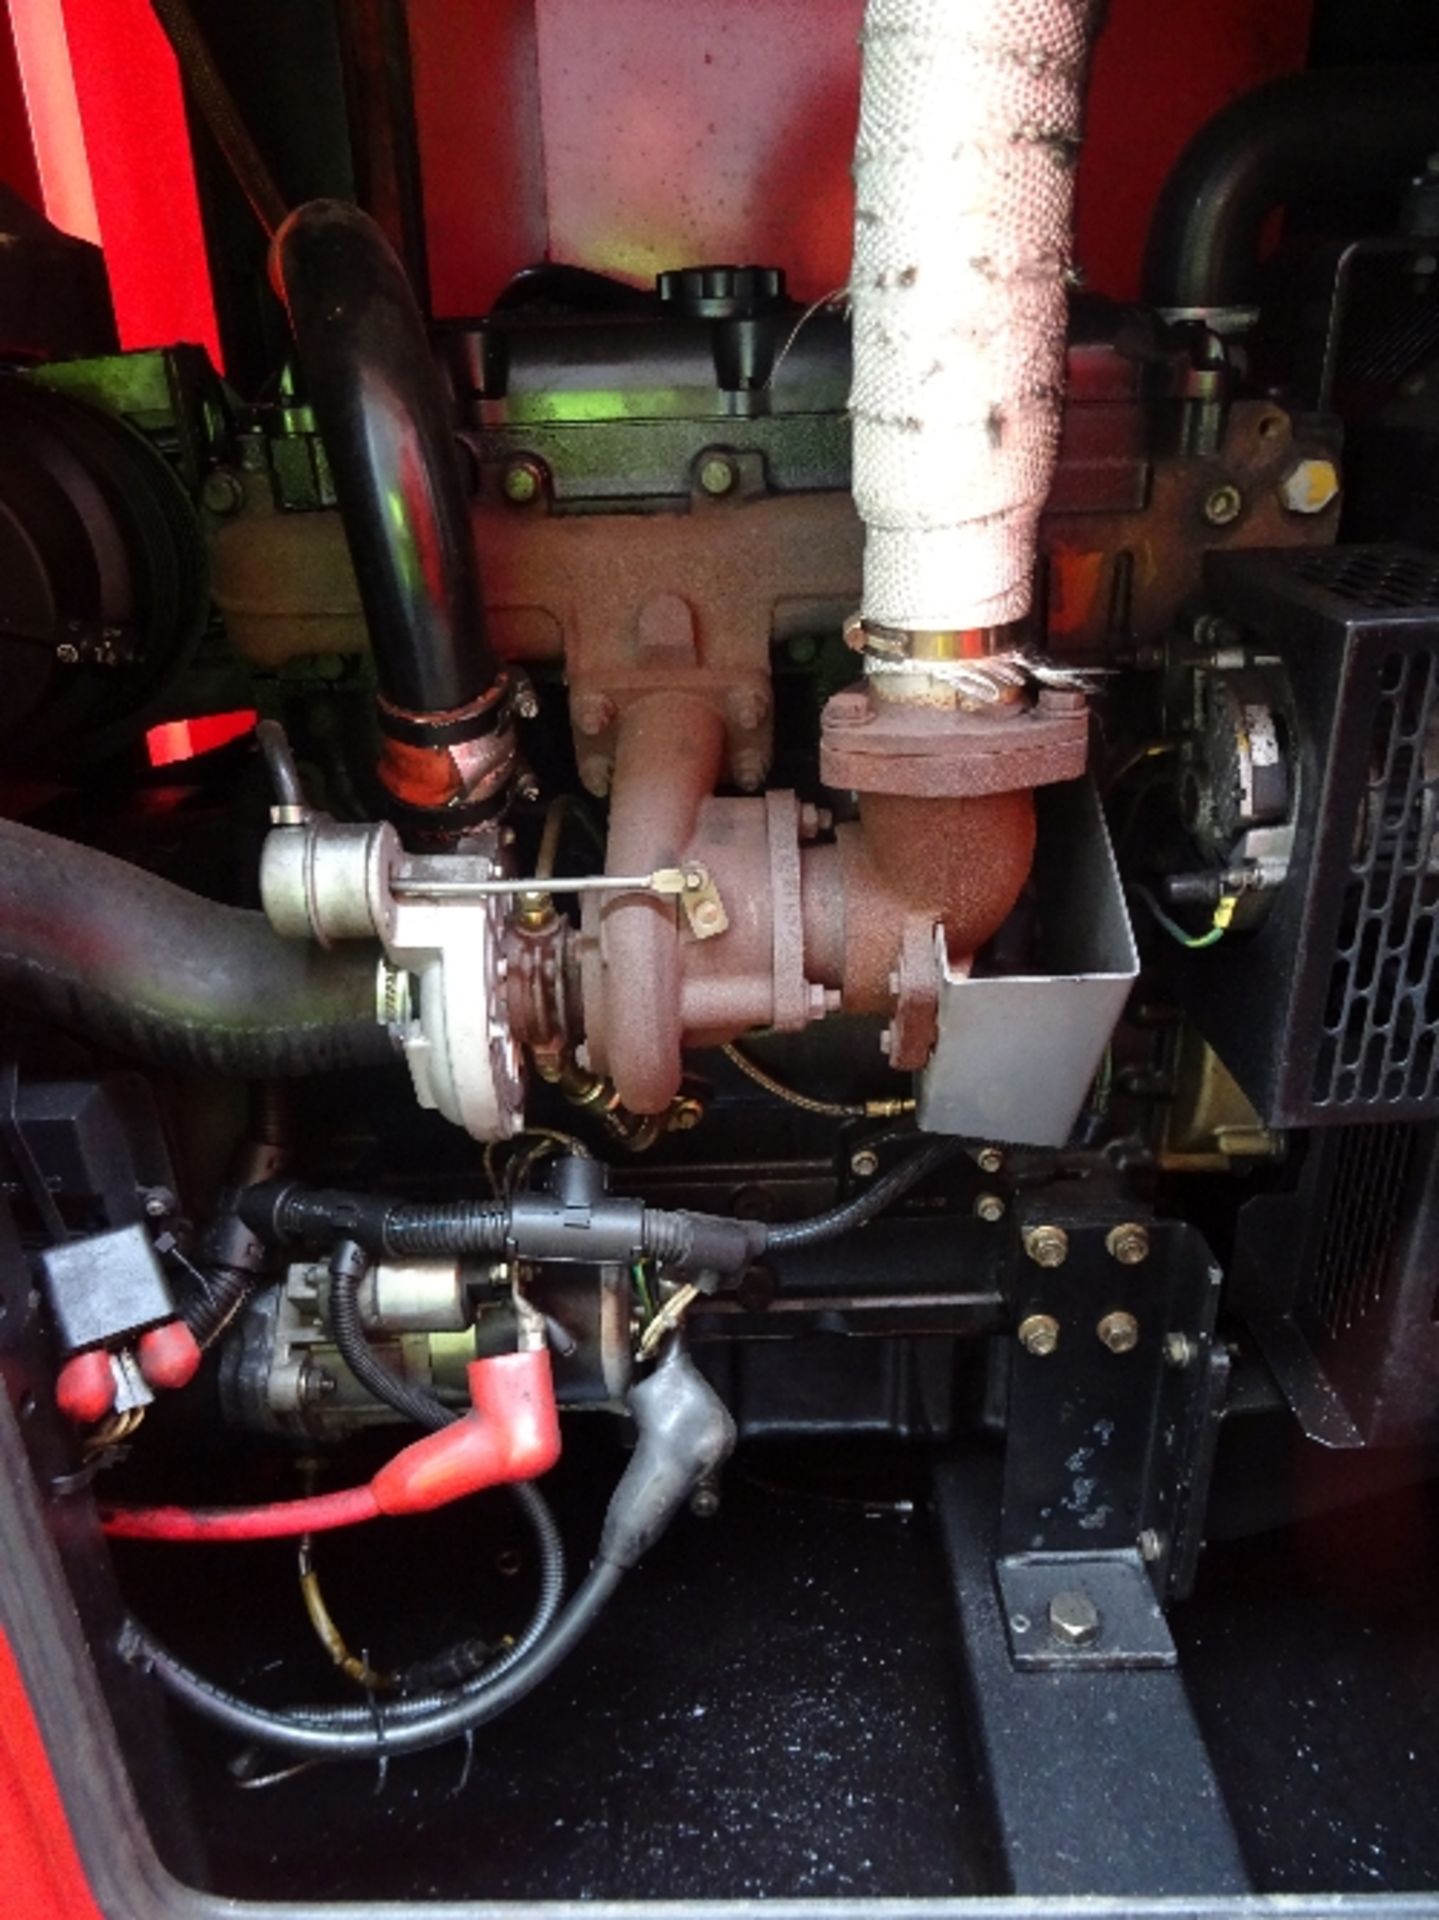 FG Wilson 60kva generator 31038 hrs - starts and runs - drive to alternator disconnected This lot is - Image 4 of 6